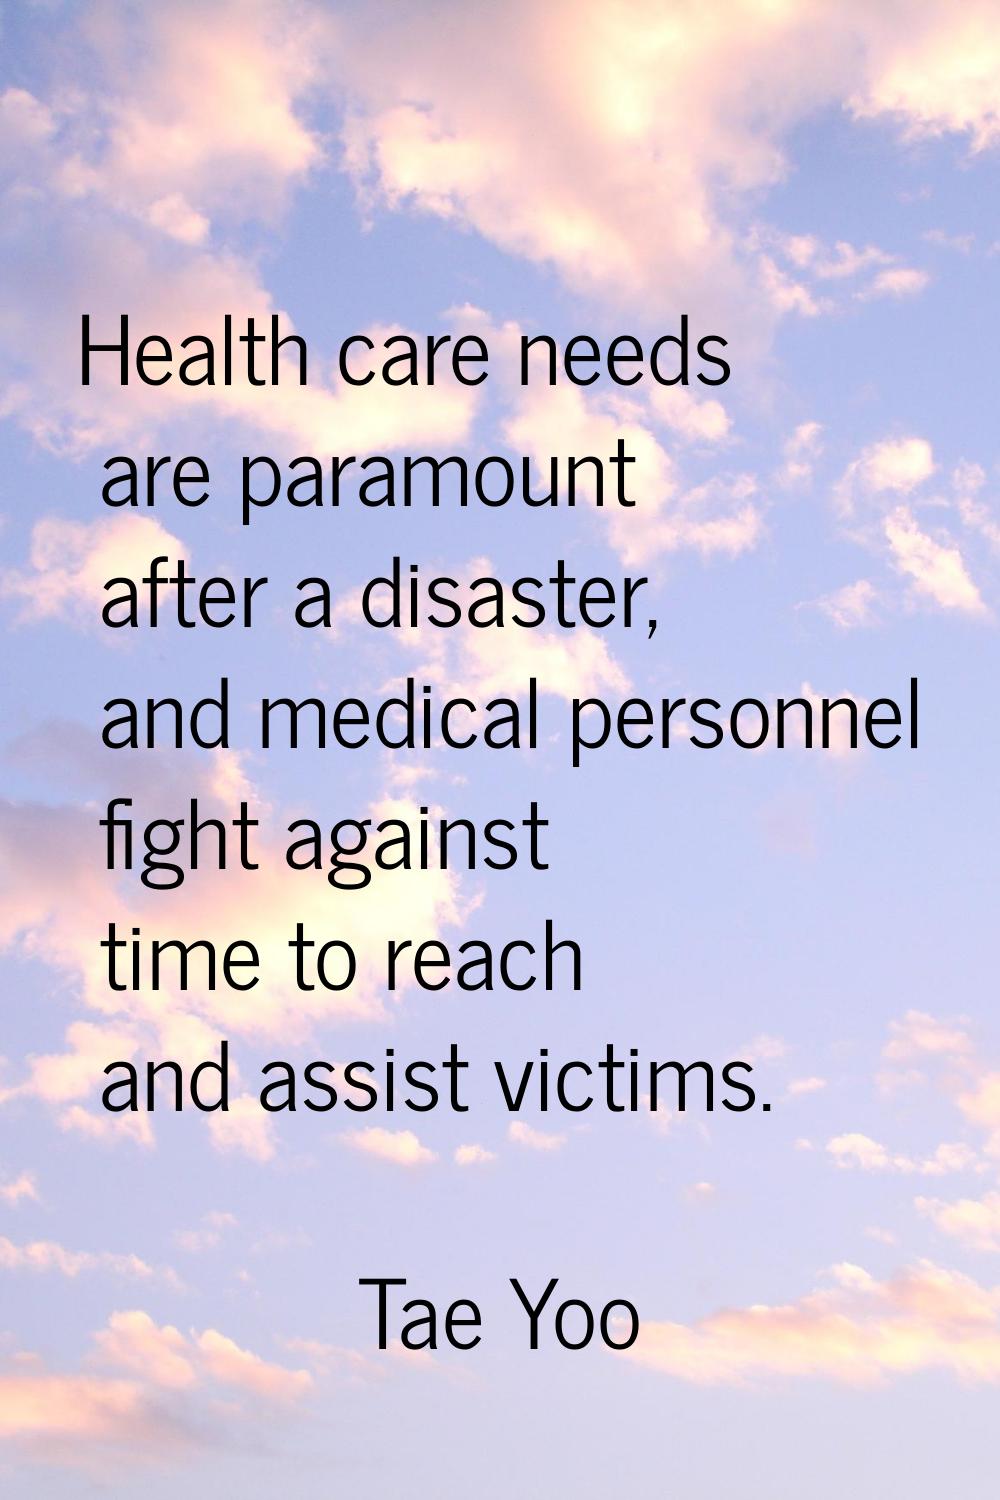 Health care needs are paramount after a disaster, and medical personnel fight against time to reach